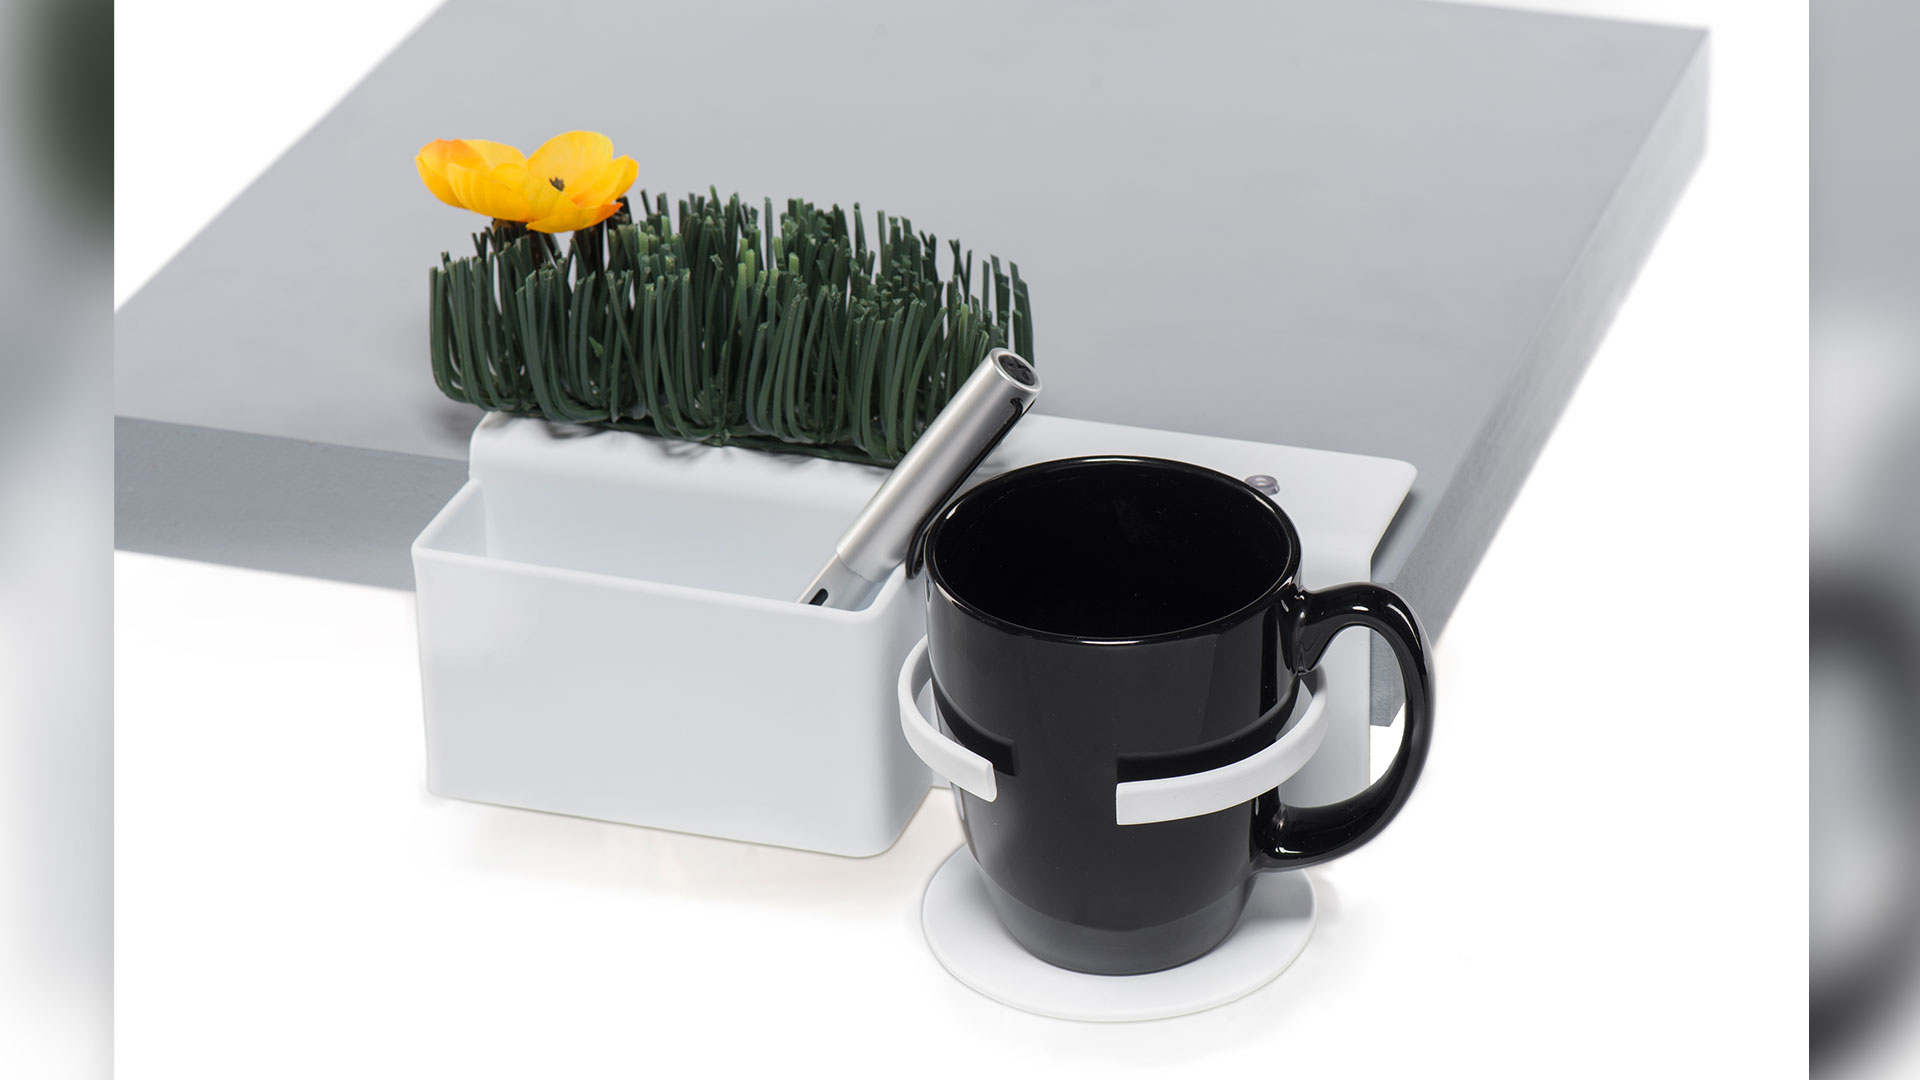 White Deskside shelf attached to side of table top a rectangular slot with pen inside, fake greenery above slot, a cup holder to the right of slot with black mug inside